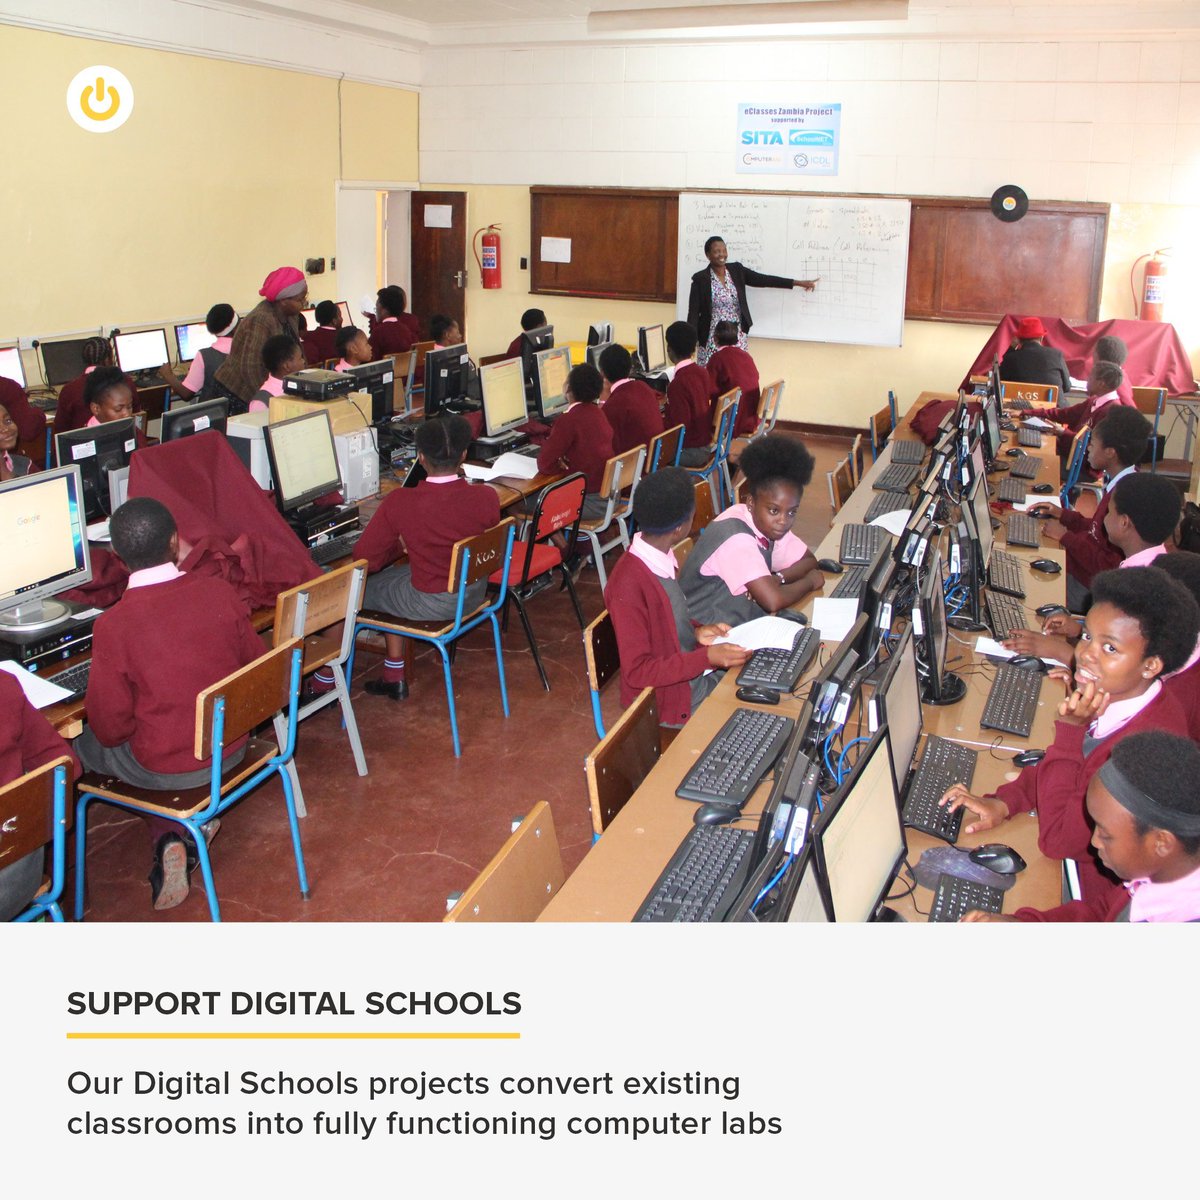 We have established digital schools around the world as a part of our scalable projects. We’ve opened 25 labs in 7 countries with the help of our technology partners.

To find out more, contact us.
info@computeraid.org  

#DigitalSchools #ComputerLabs #ICTAccess #DigitalSkills